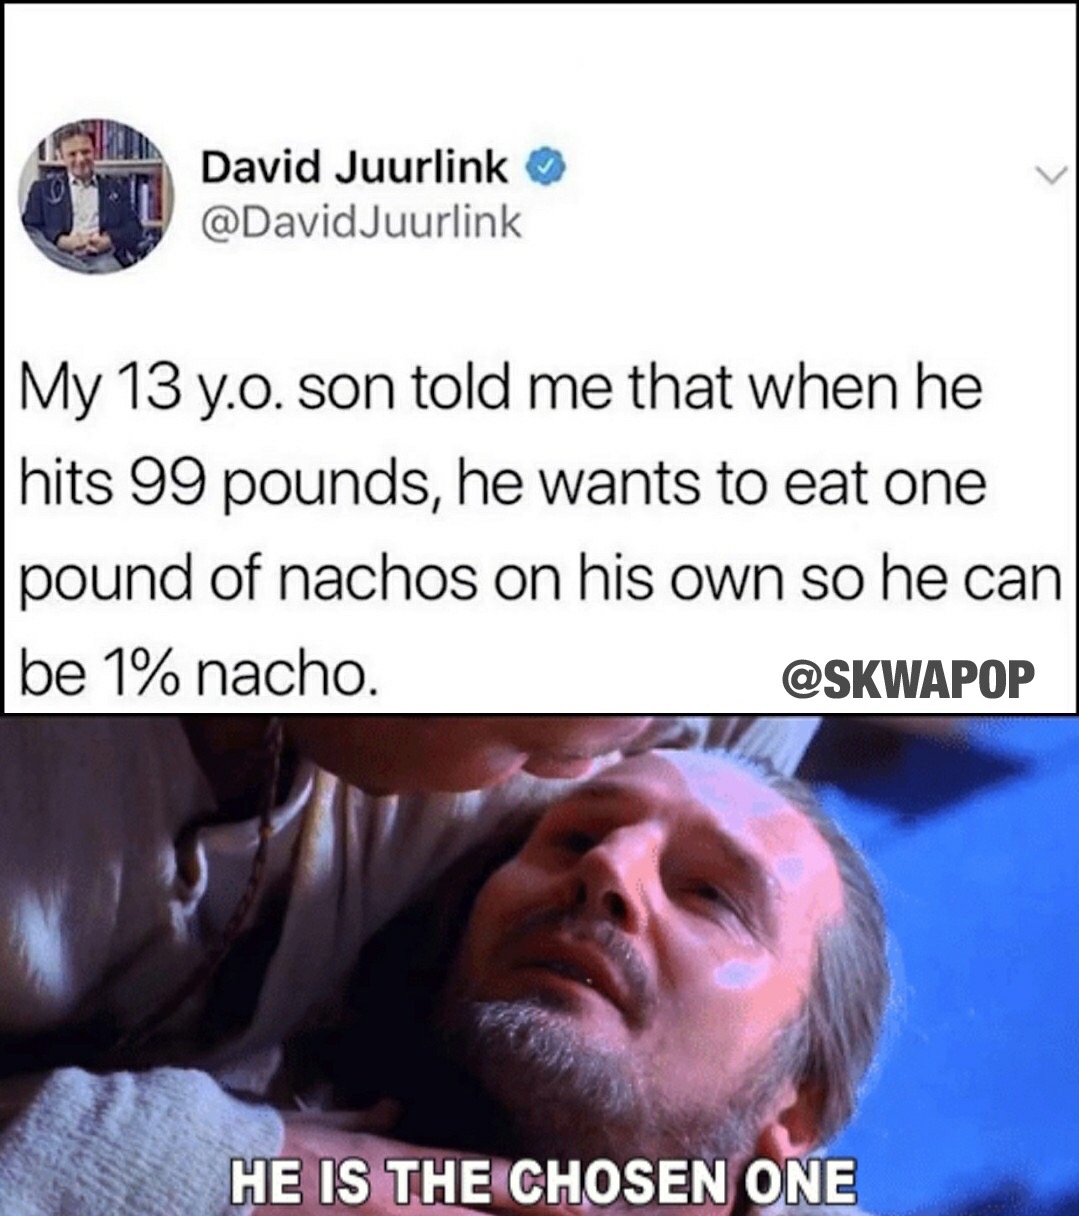 prequels memes - David Juurlink Juurlink My 13 y.o. son told me that when he hits 99 pounds, he wants to eat one pound of nachos on his own so he can be 1% nacho. He Is The Chosen One